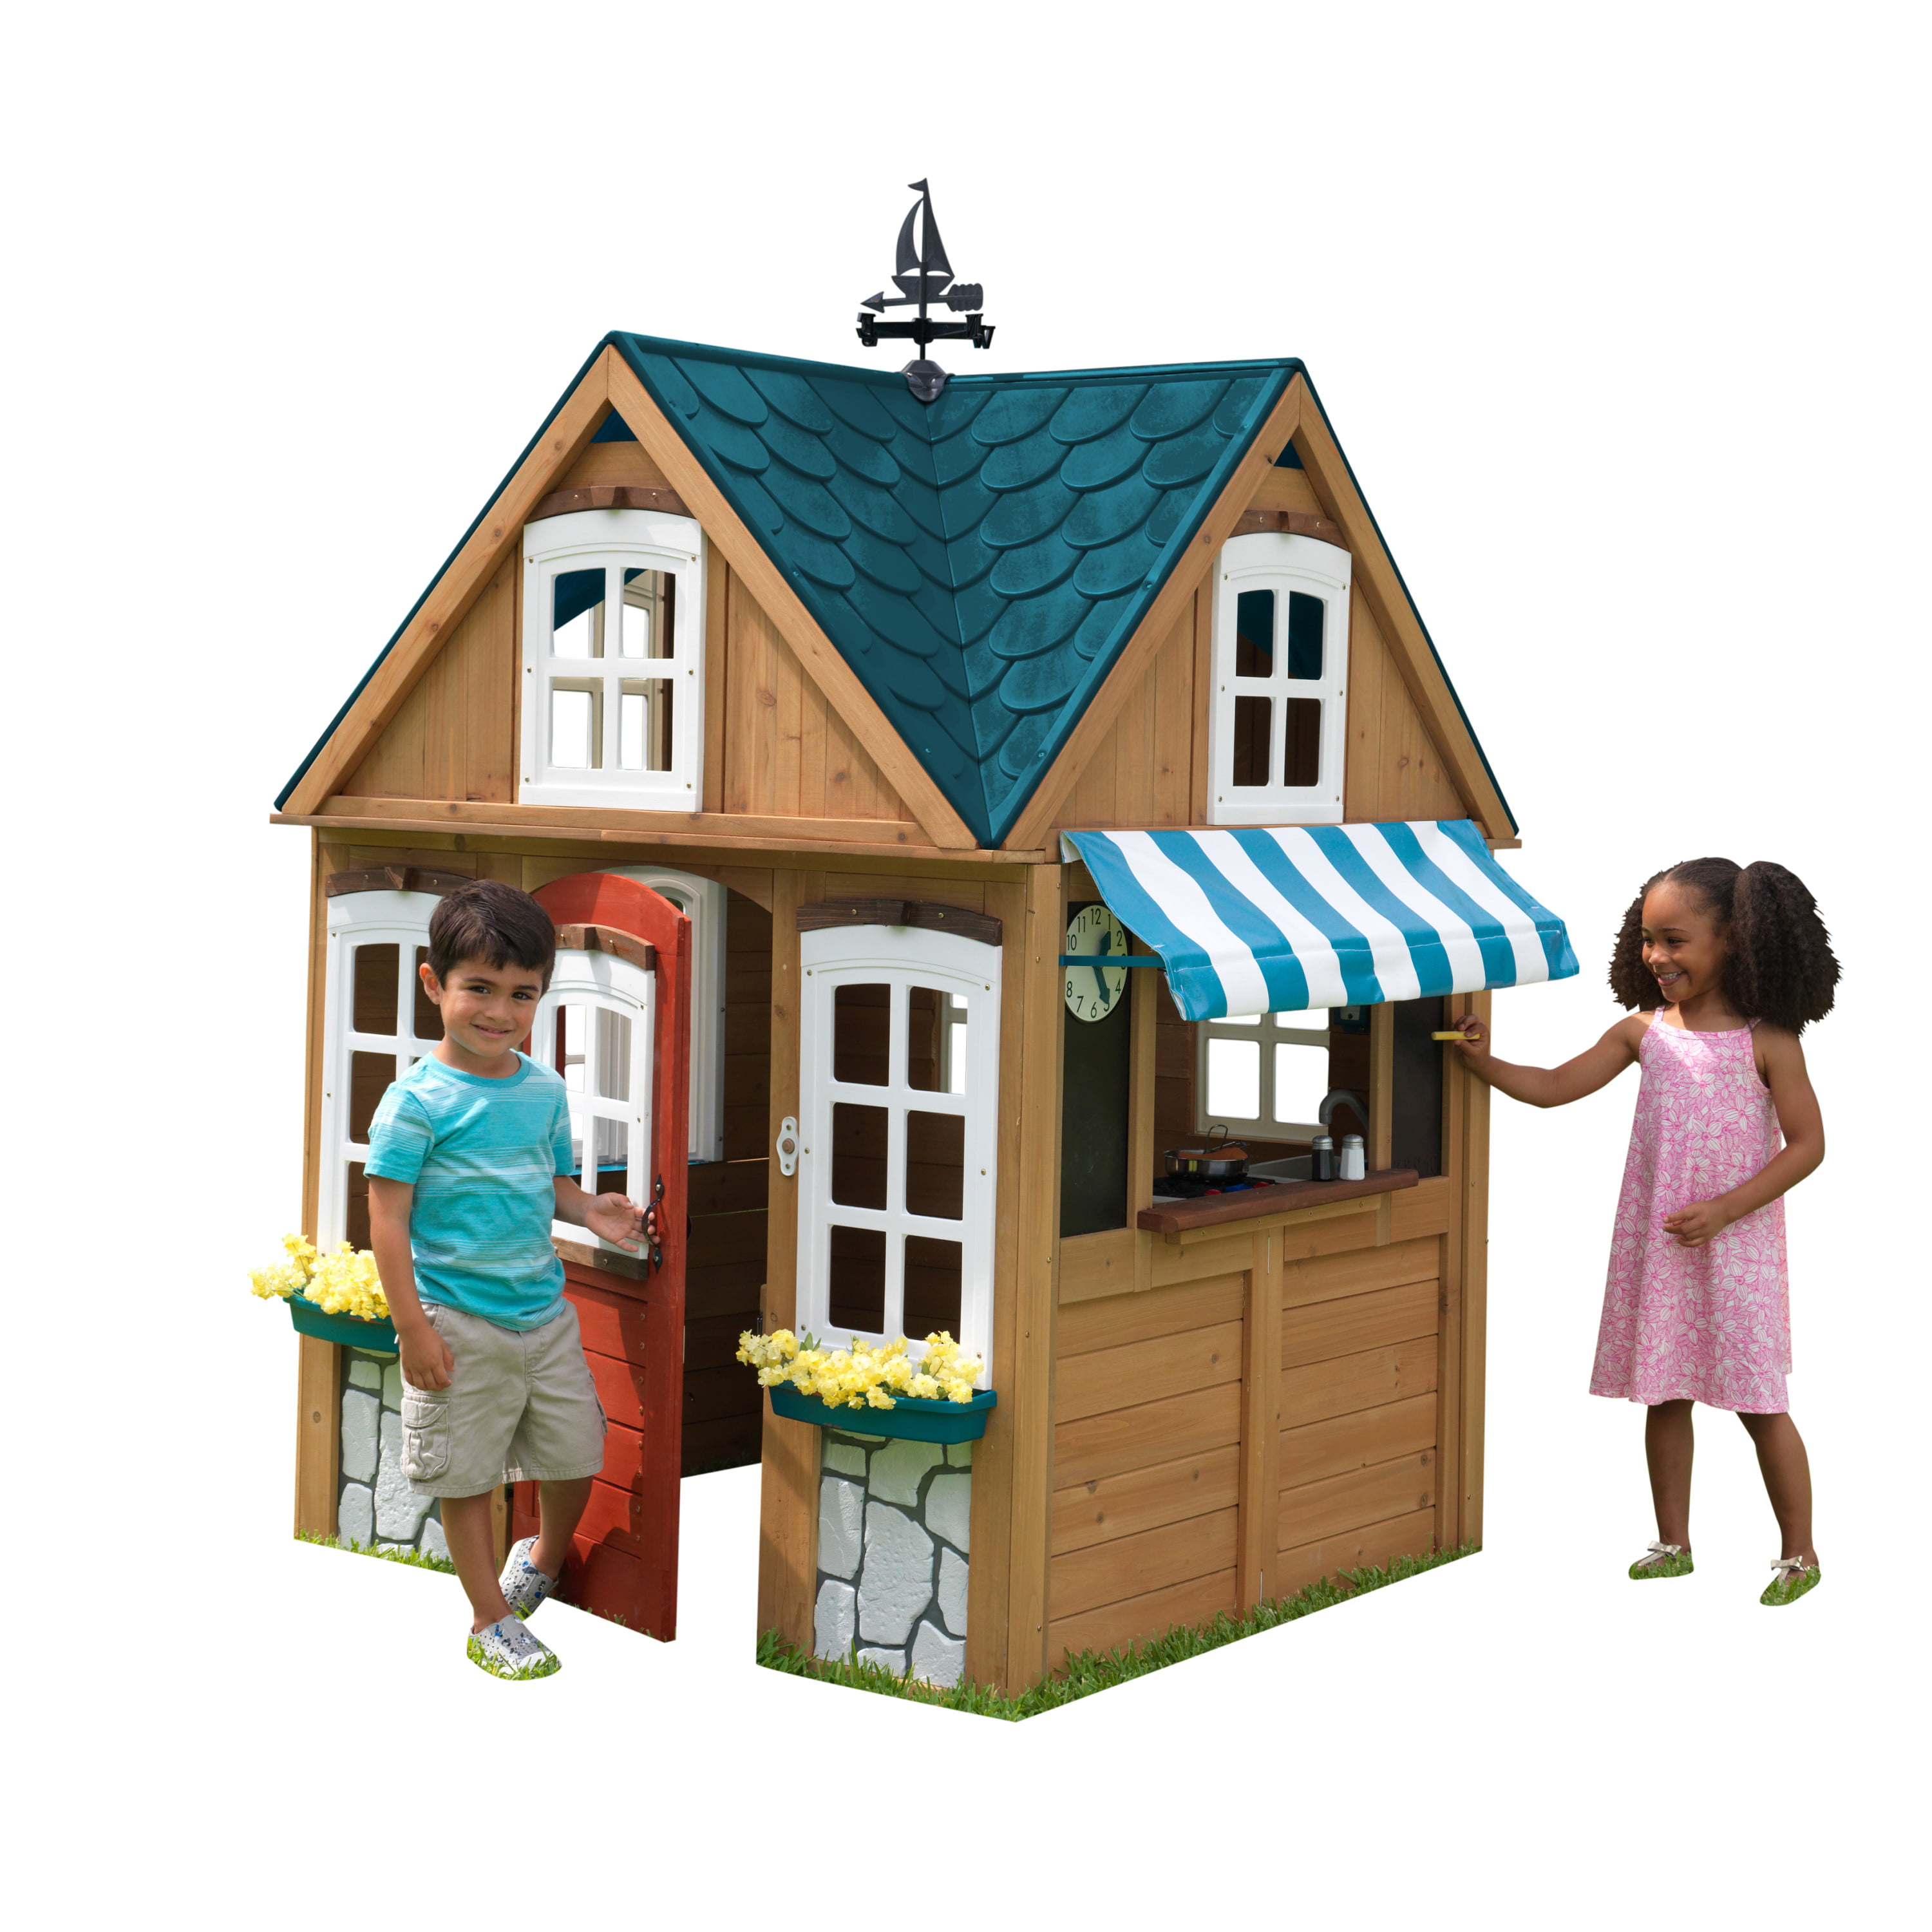 Cope Cottage Playhouse Patio Outdoor Play House Activity Plastic Kids New Free 